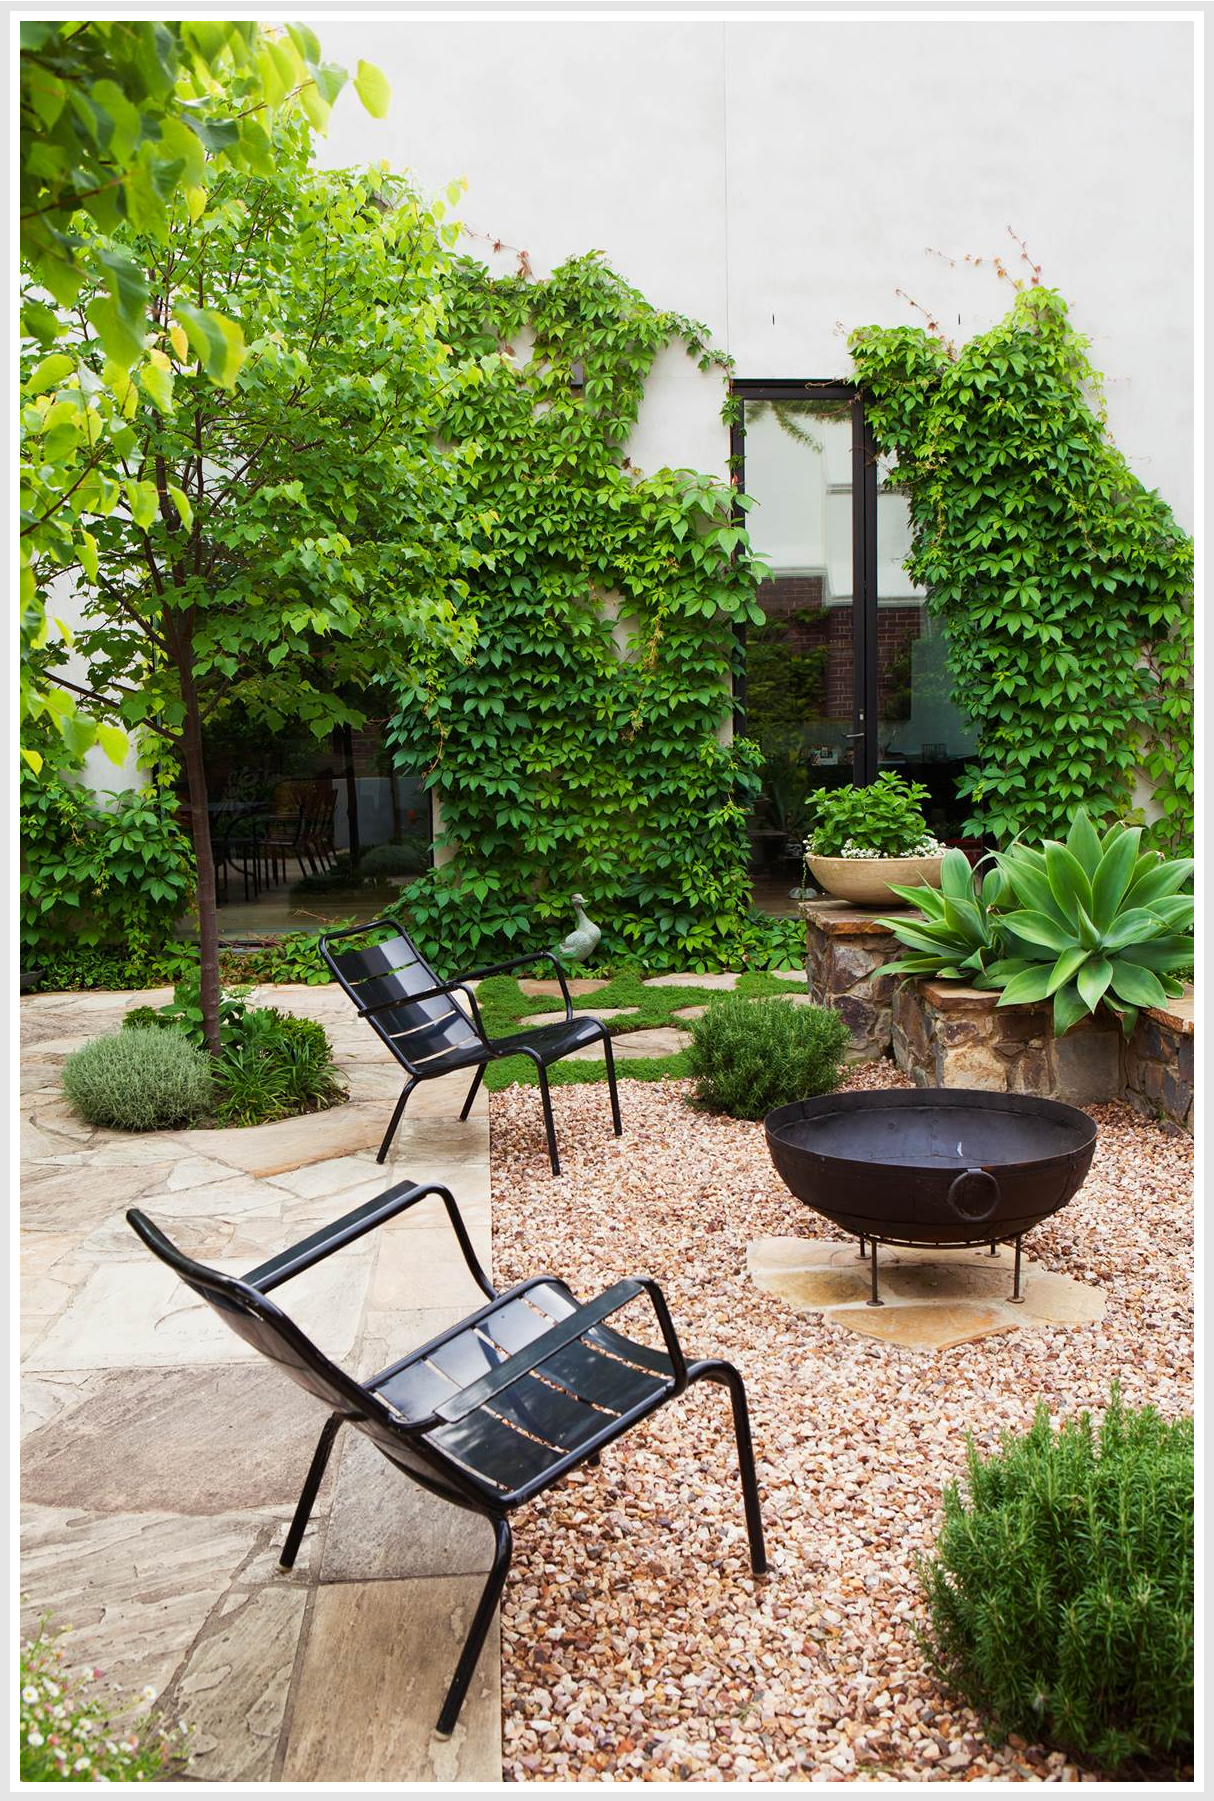 Outdoor firepit next to patio, 2 metal chairs around it.